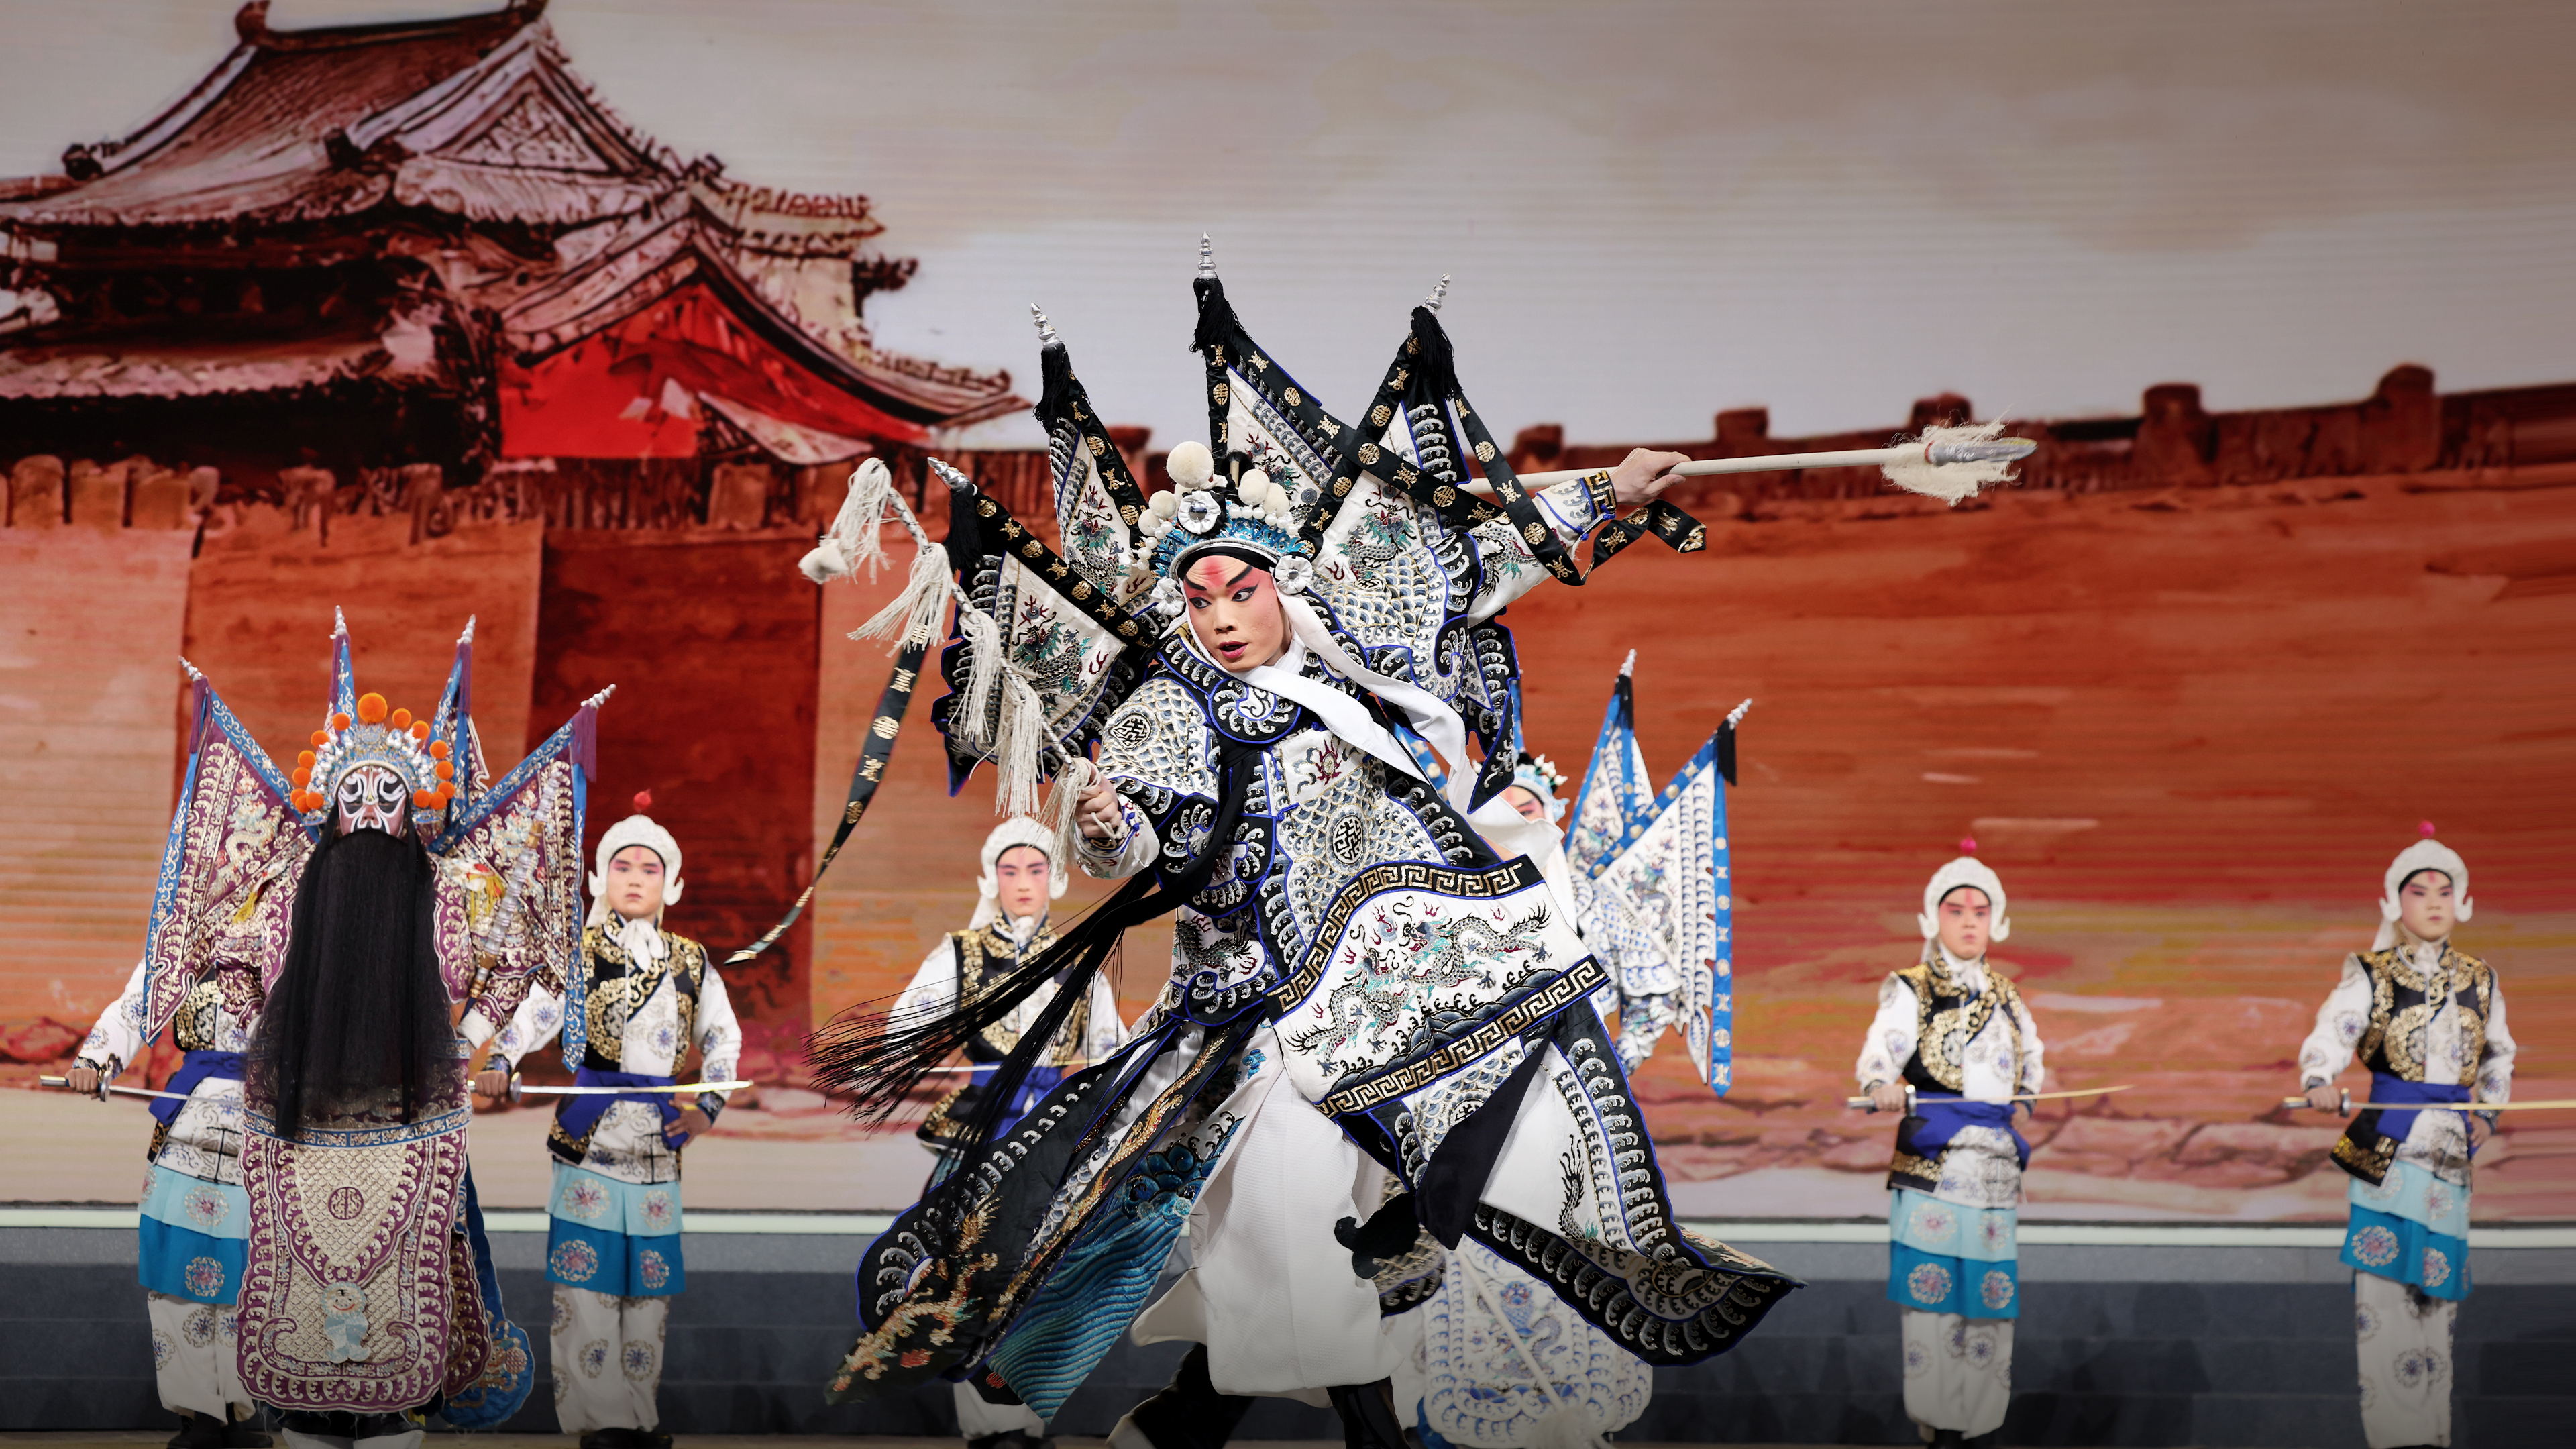 Young Peking Opera talents perform on stage in Beijing, China, in this undated photo. /Photo provided to CGTN